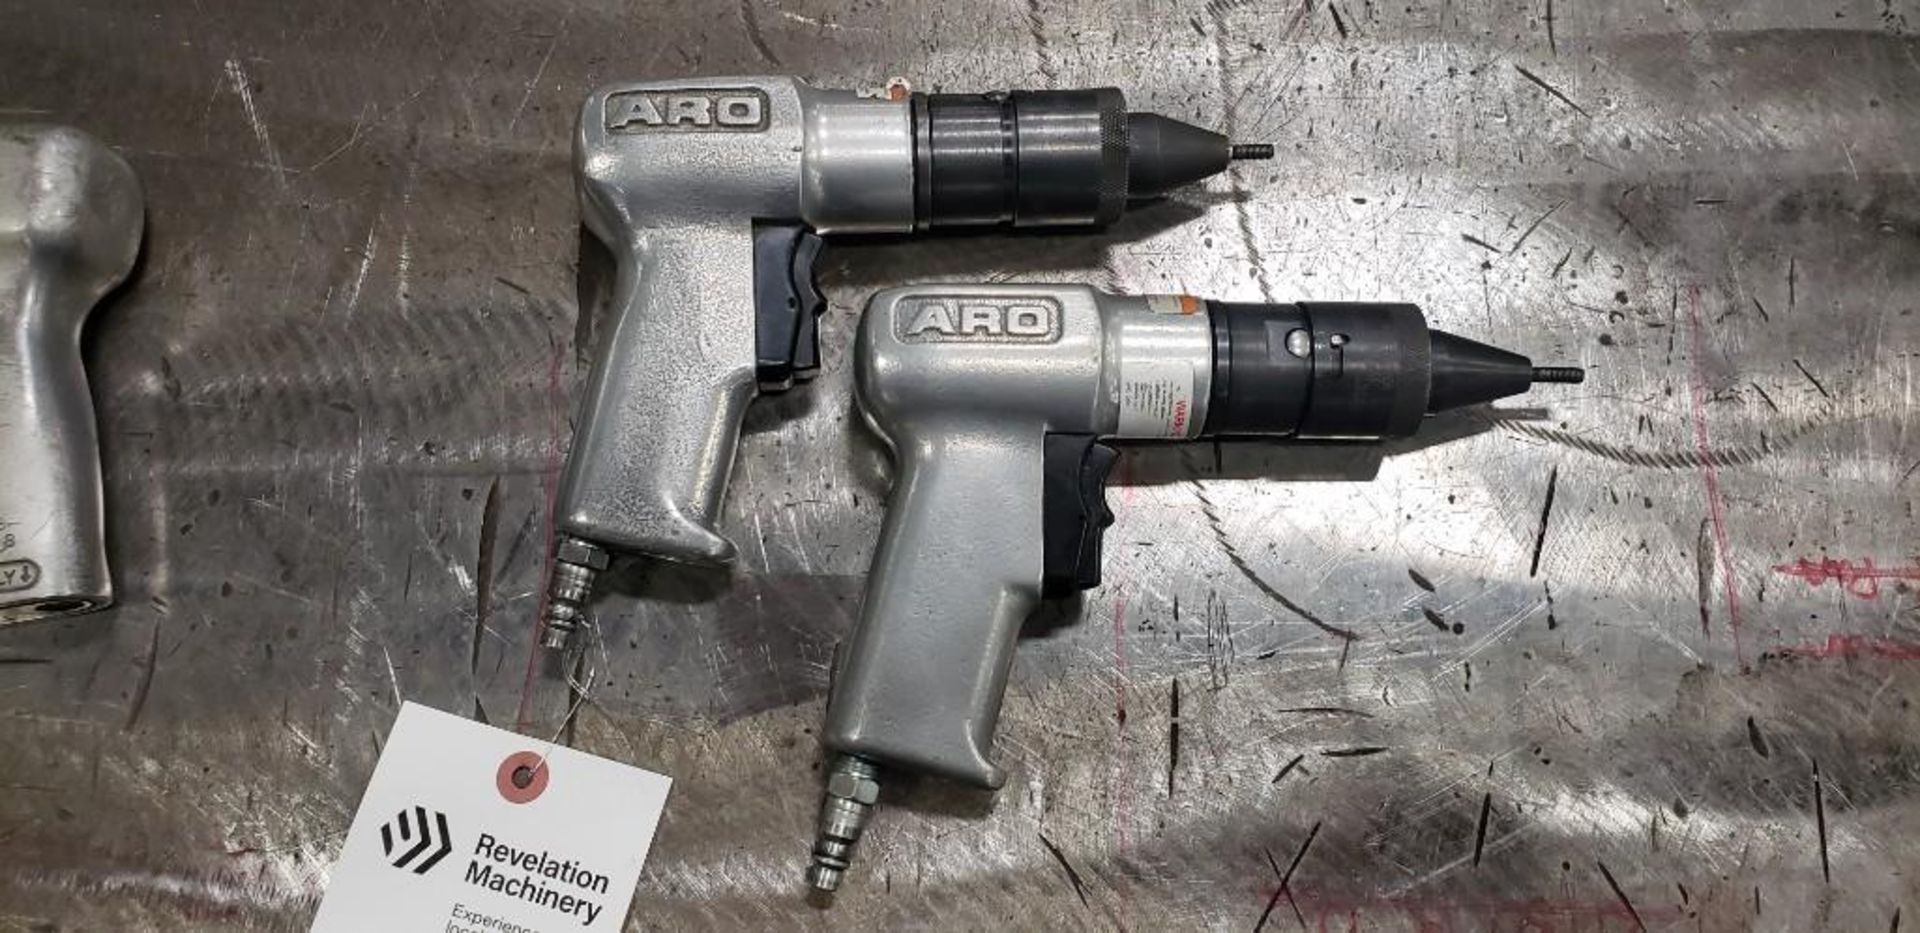 (2) ARO AIR POWERED THREADED INSERT TOOLS - Image 4 of 4